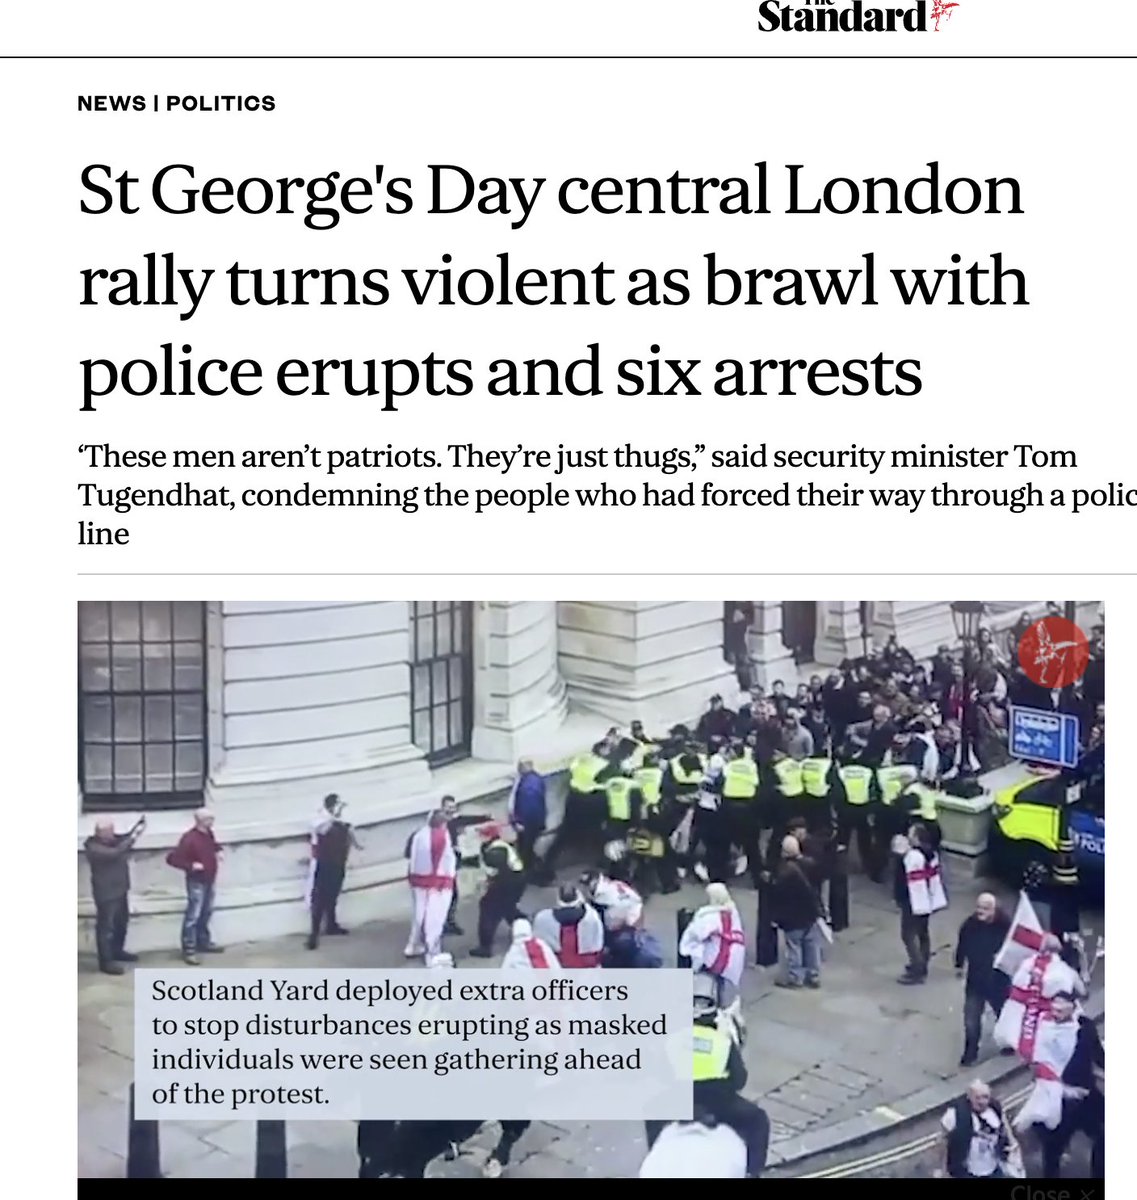 St George's Day in Catalonia vs. St George's Day in England